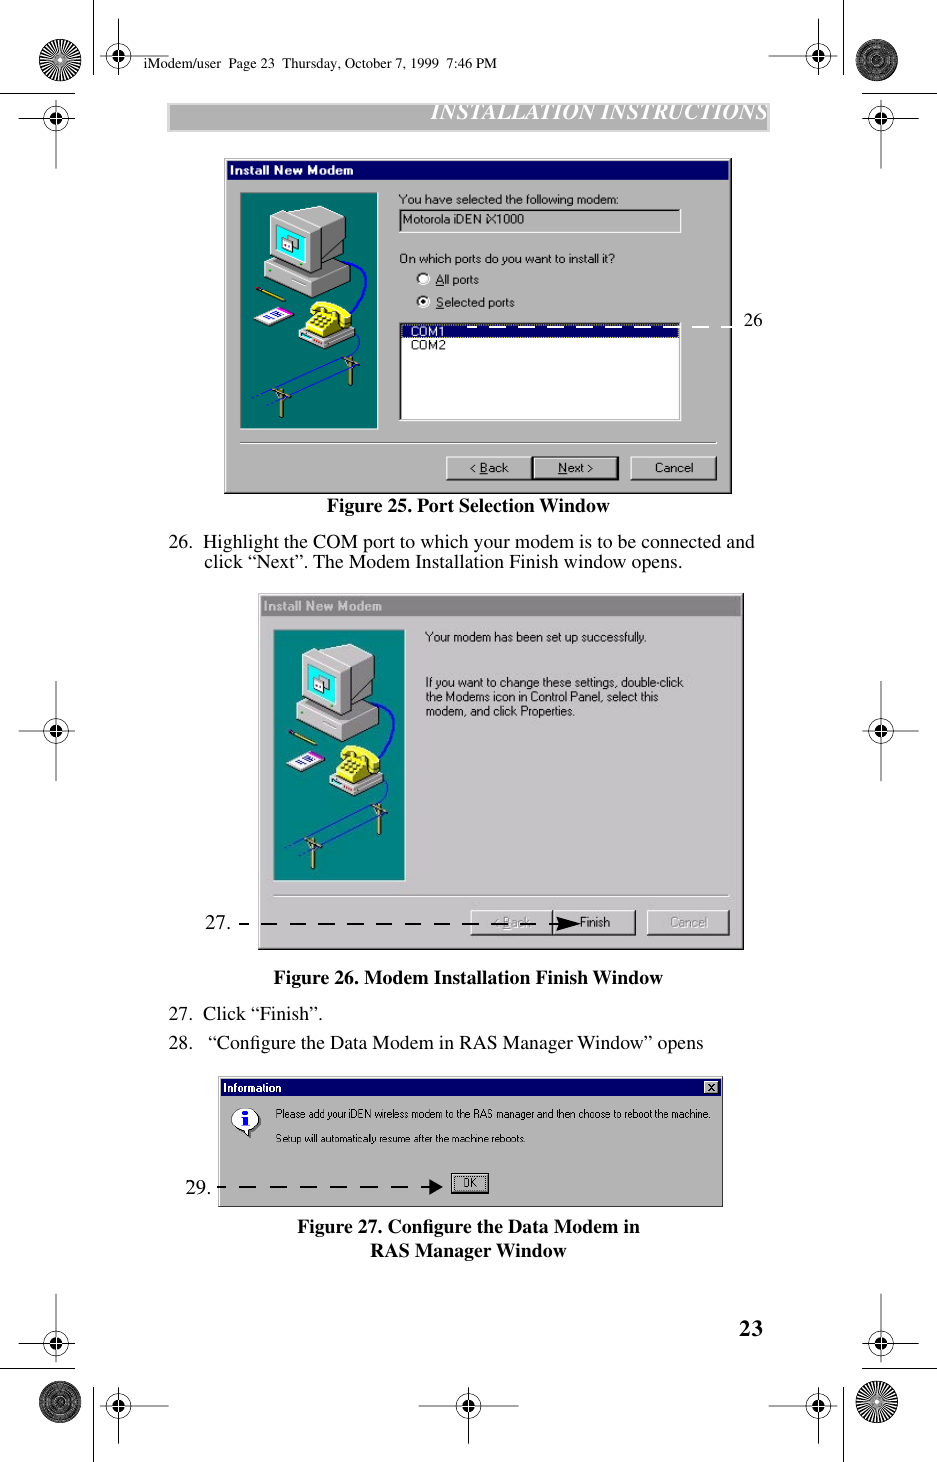 23   INSTALLATION INSTRUCTIONS   Figure 25. Port Selection Window26.  Highlight the COM port to which your modem is to be connected and click “Next”. The Modem Installation Finish window opens. Figure 26. Modem Installation Finish Window27.  Click “Finish”. 28.   “Conﬁgure the Data Modem in RAS Manager Window” opensFigure 27. Conﬁgure the Data Modem in RAS Manager Window 27. . 29.26iModem/user  Page 23  Thursday, October 7, 1999  7:46 PM